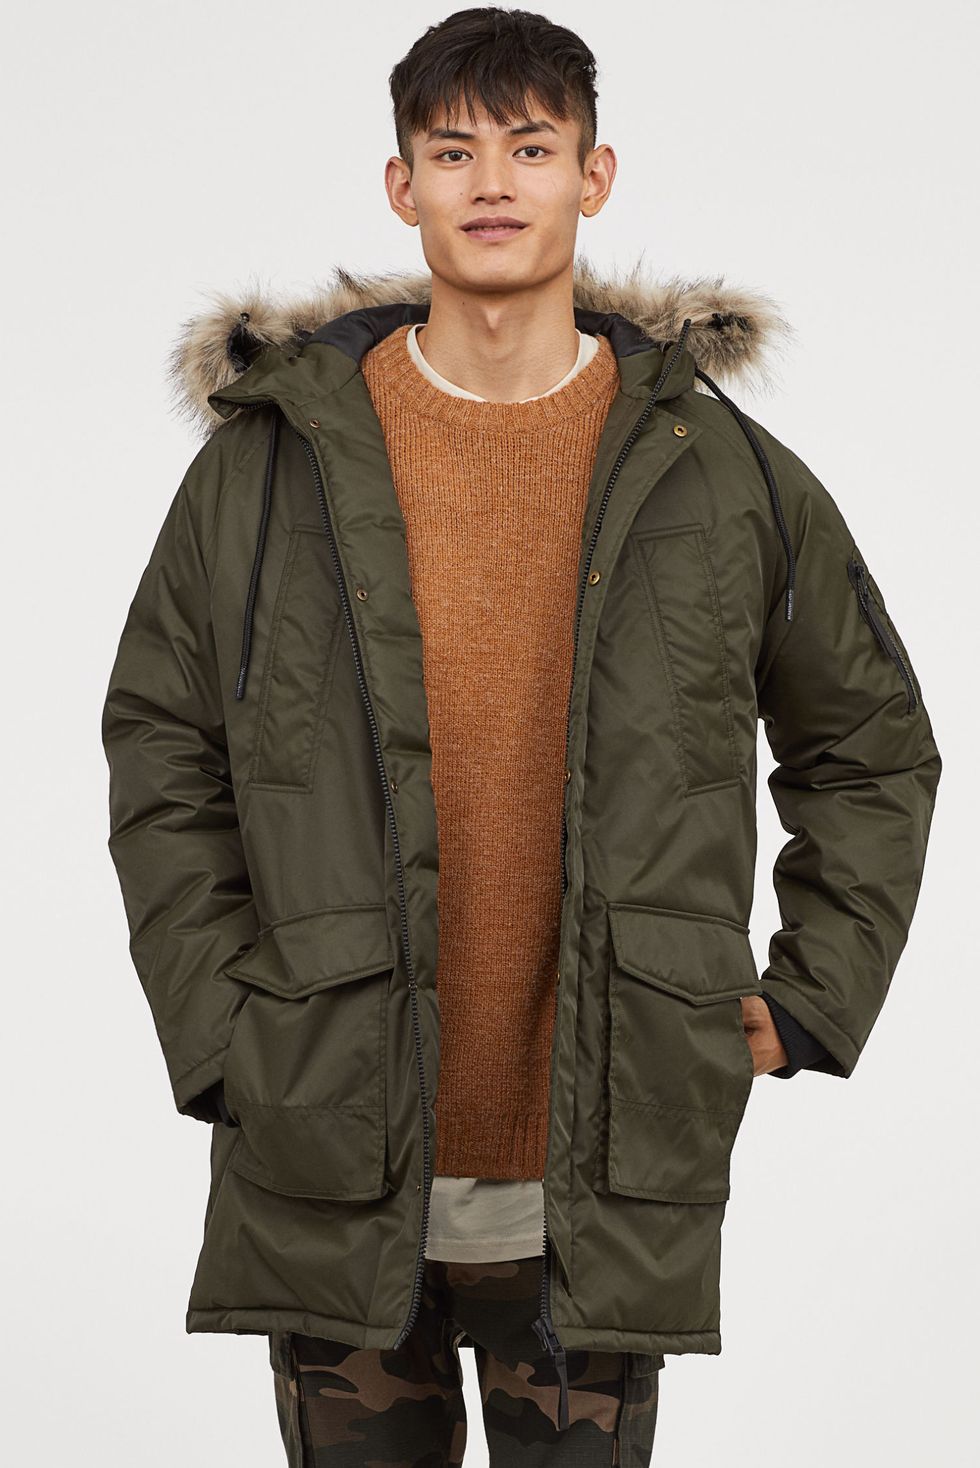 10 Best Winter Coats for Stylish Men – Affordable Mens Winter Jackets